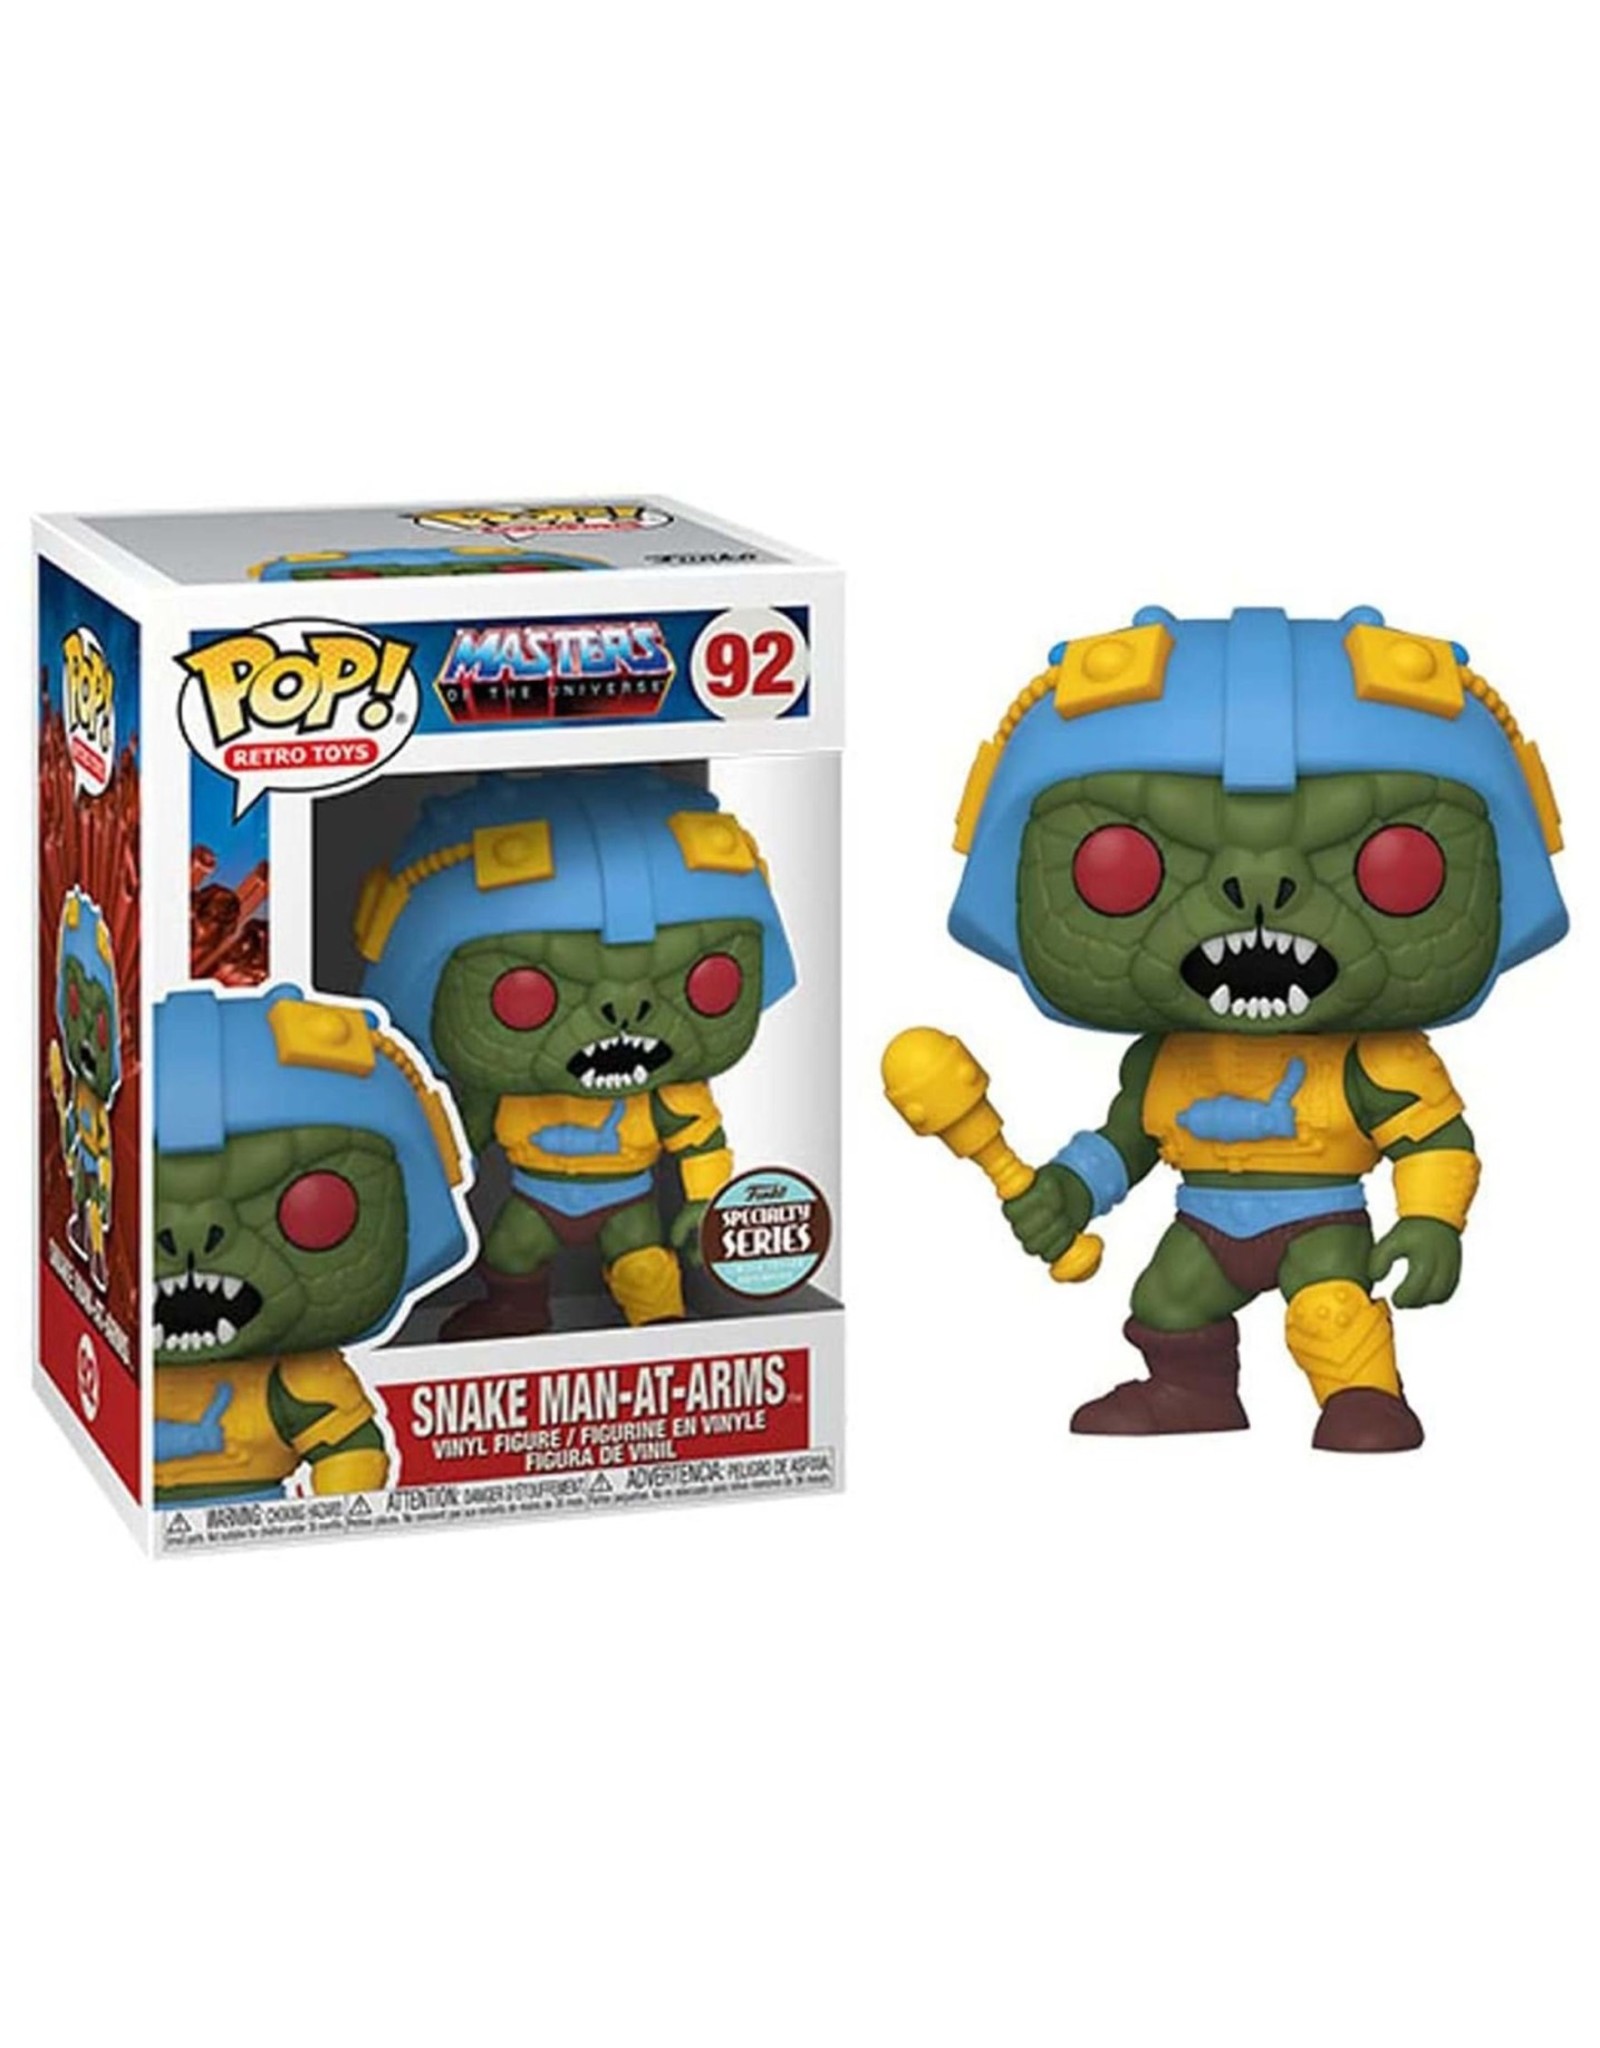 Funko Masters of the Universe Snake Man-at-Arms Chase Pop Funko